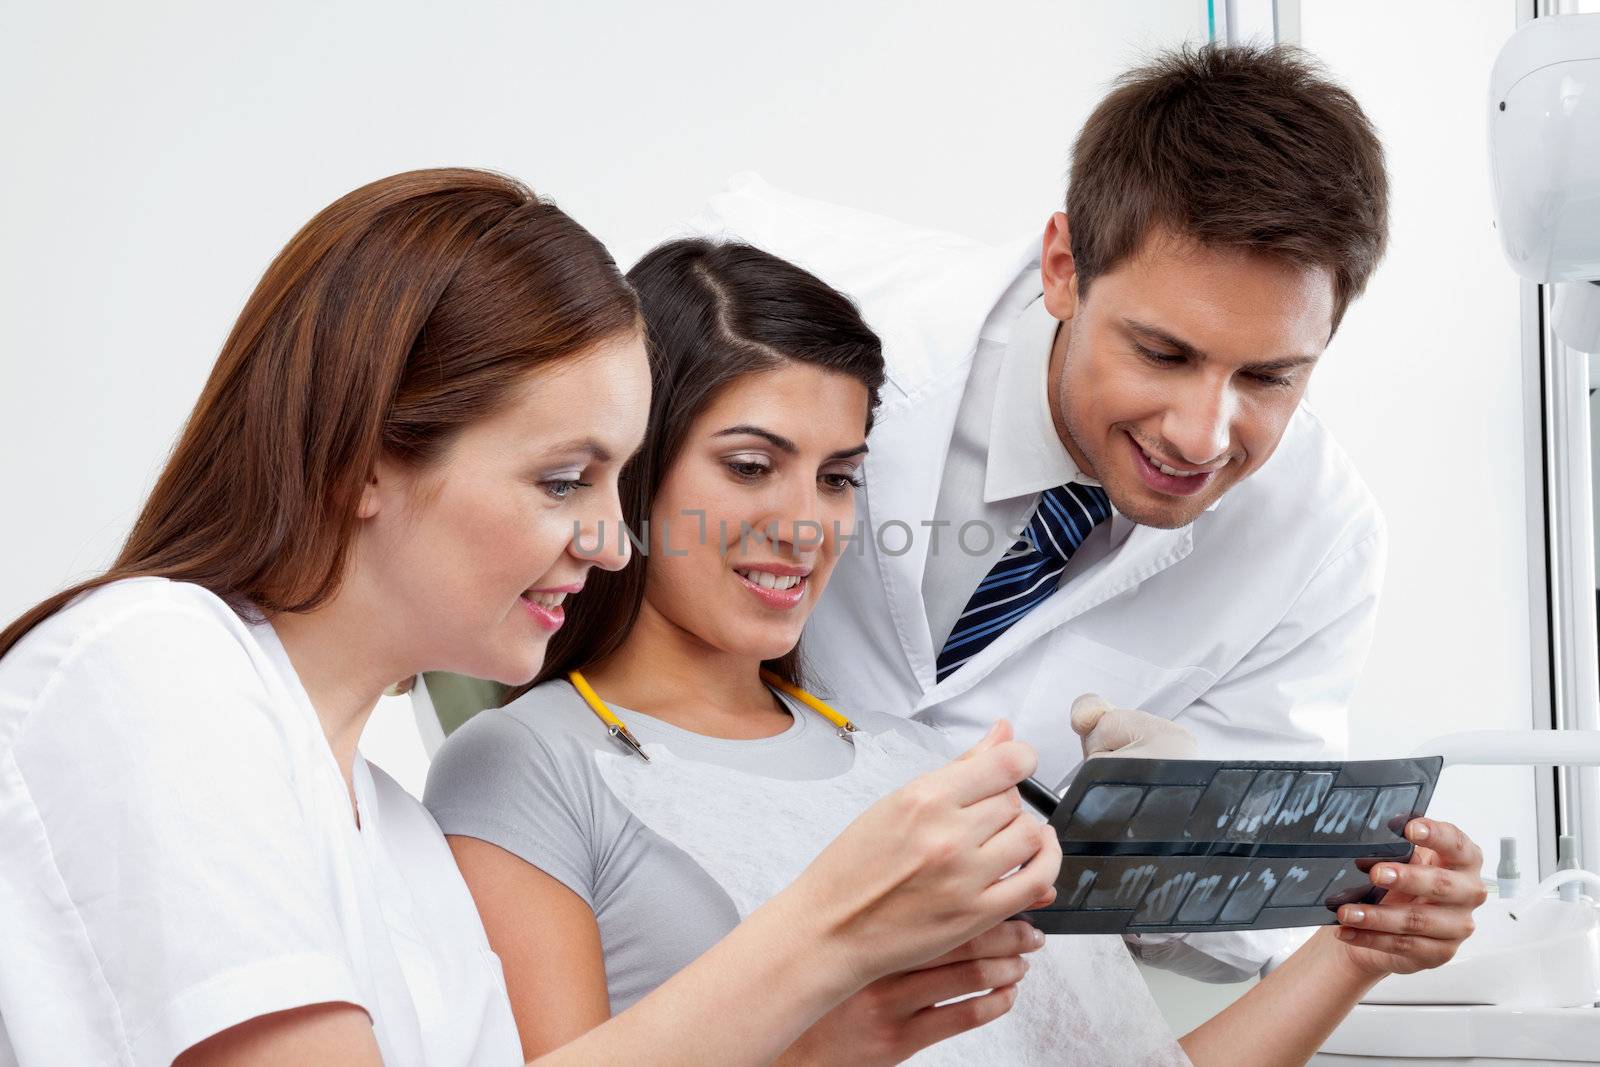 Female Nurse And Dentist Explaining X-Ray Report To Patient by leaf